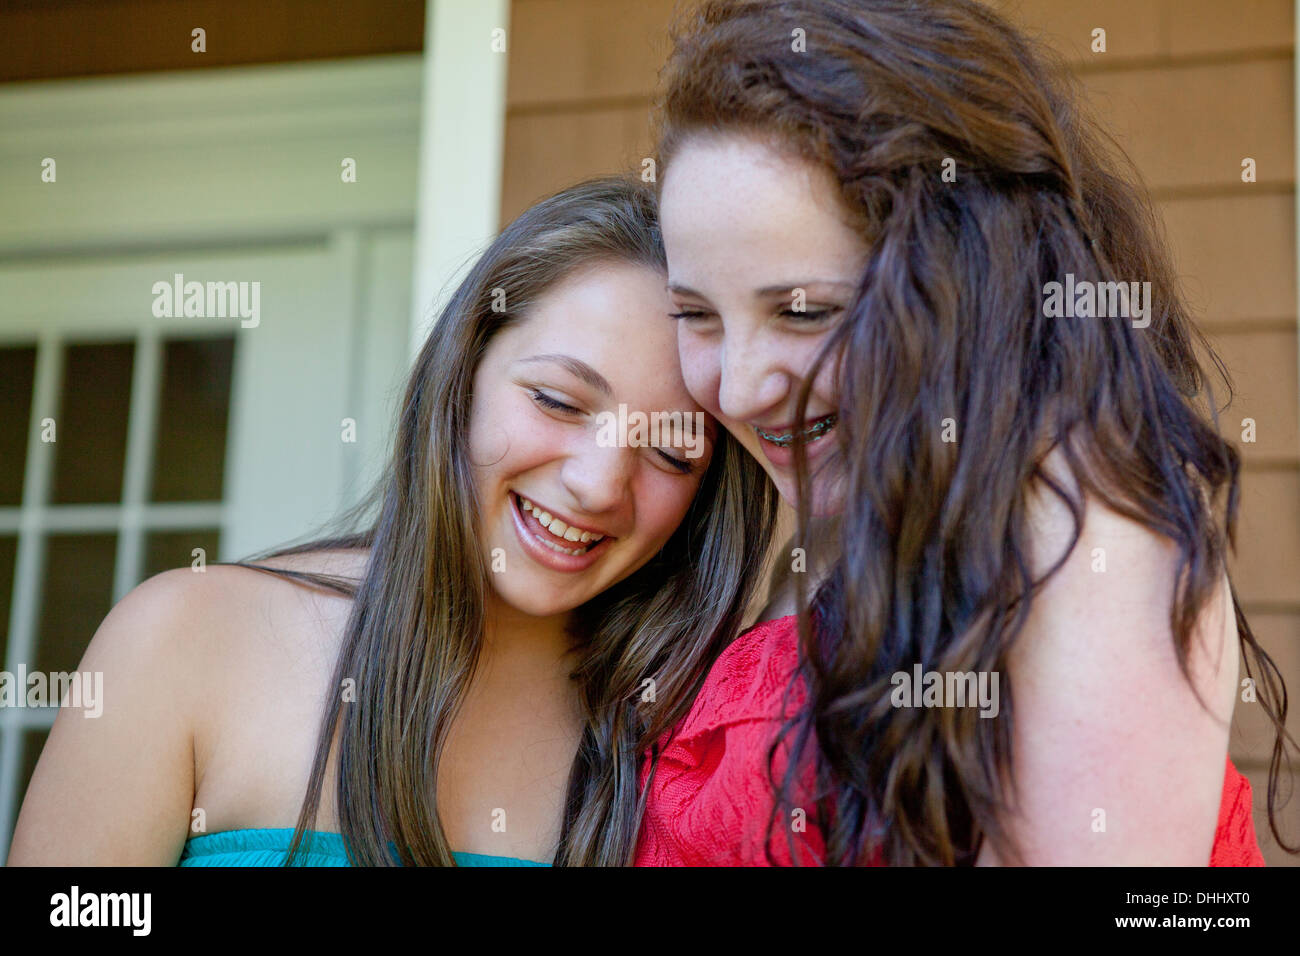 Friends laughing Stock Photo